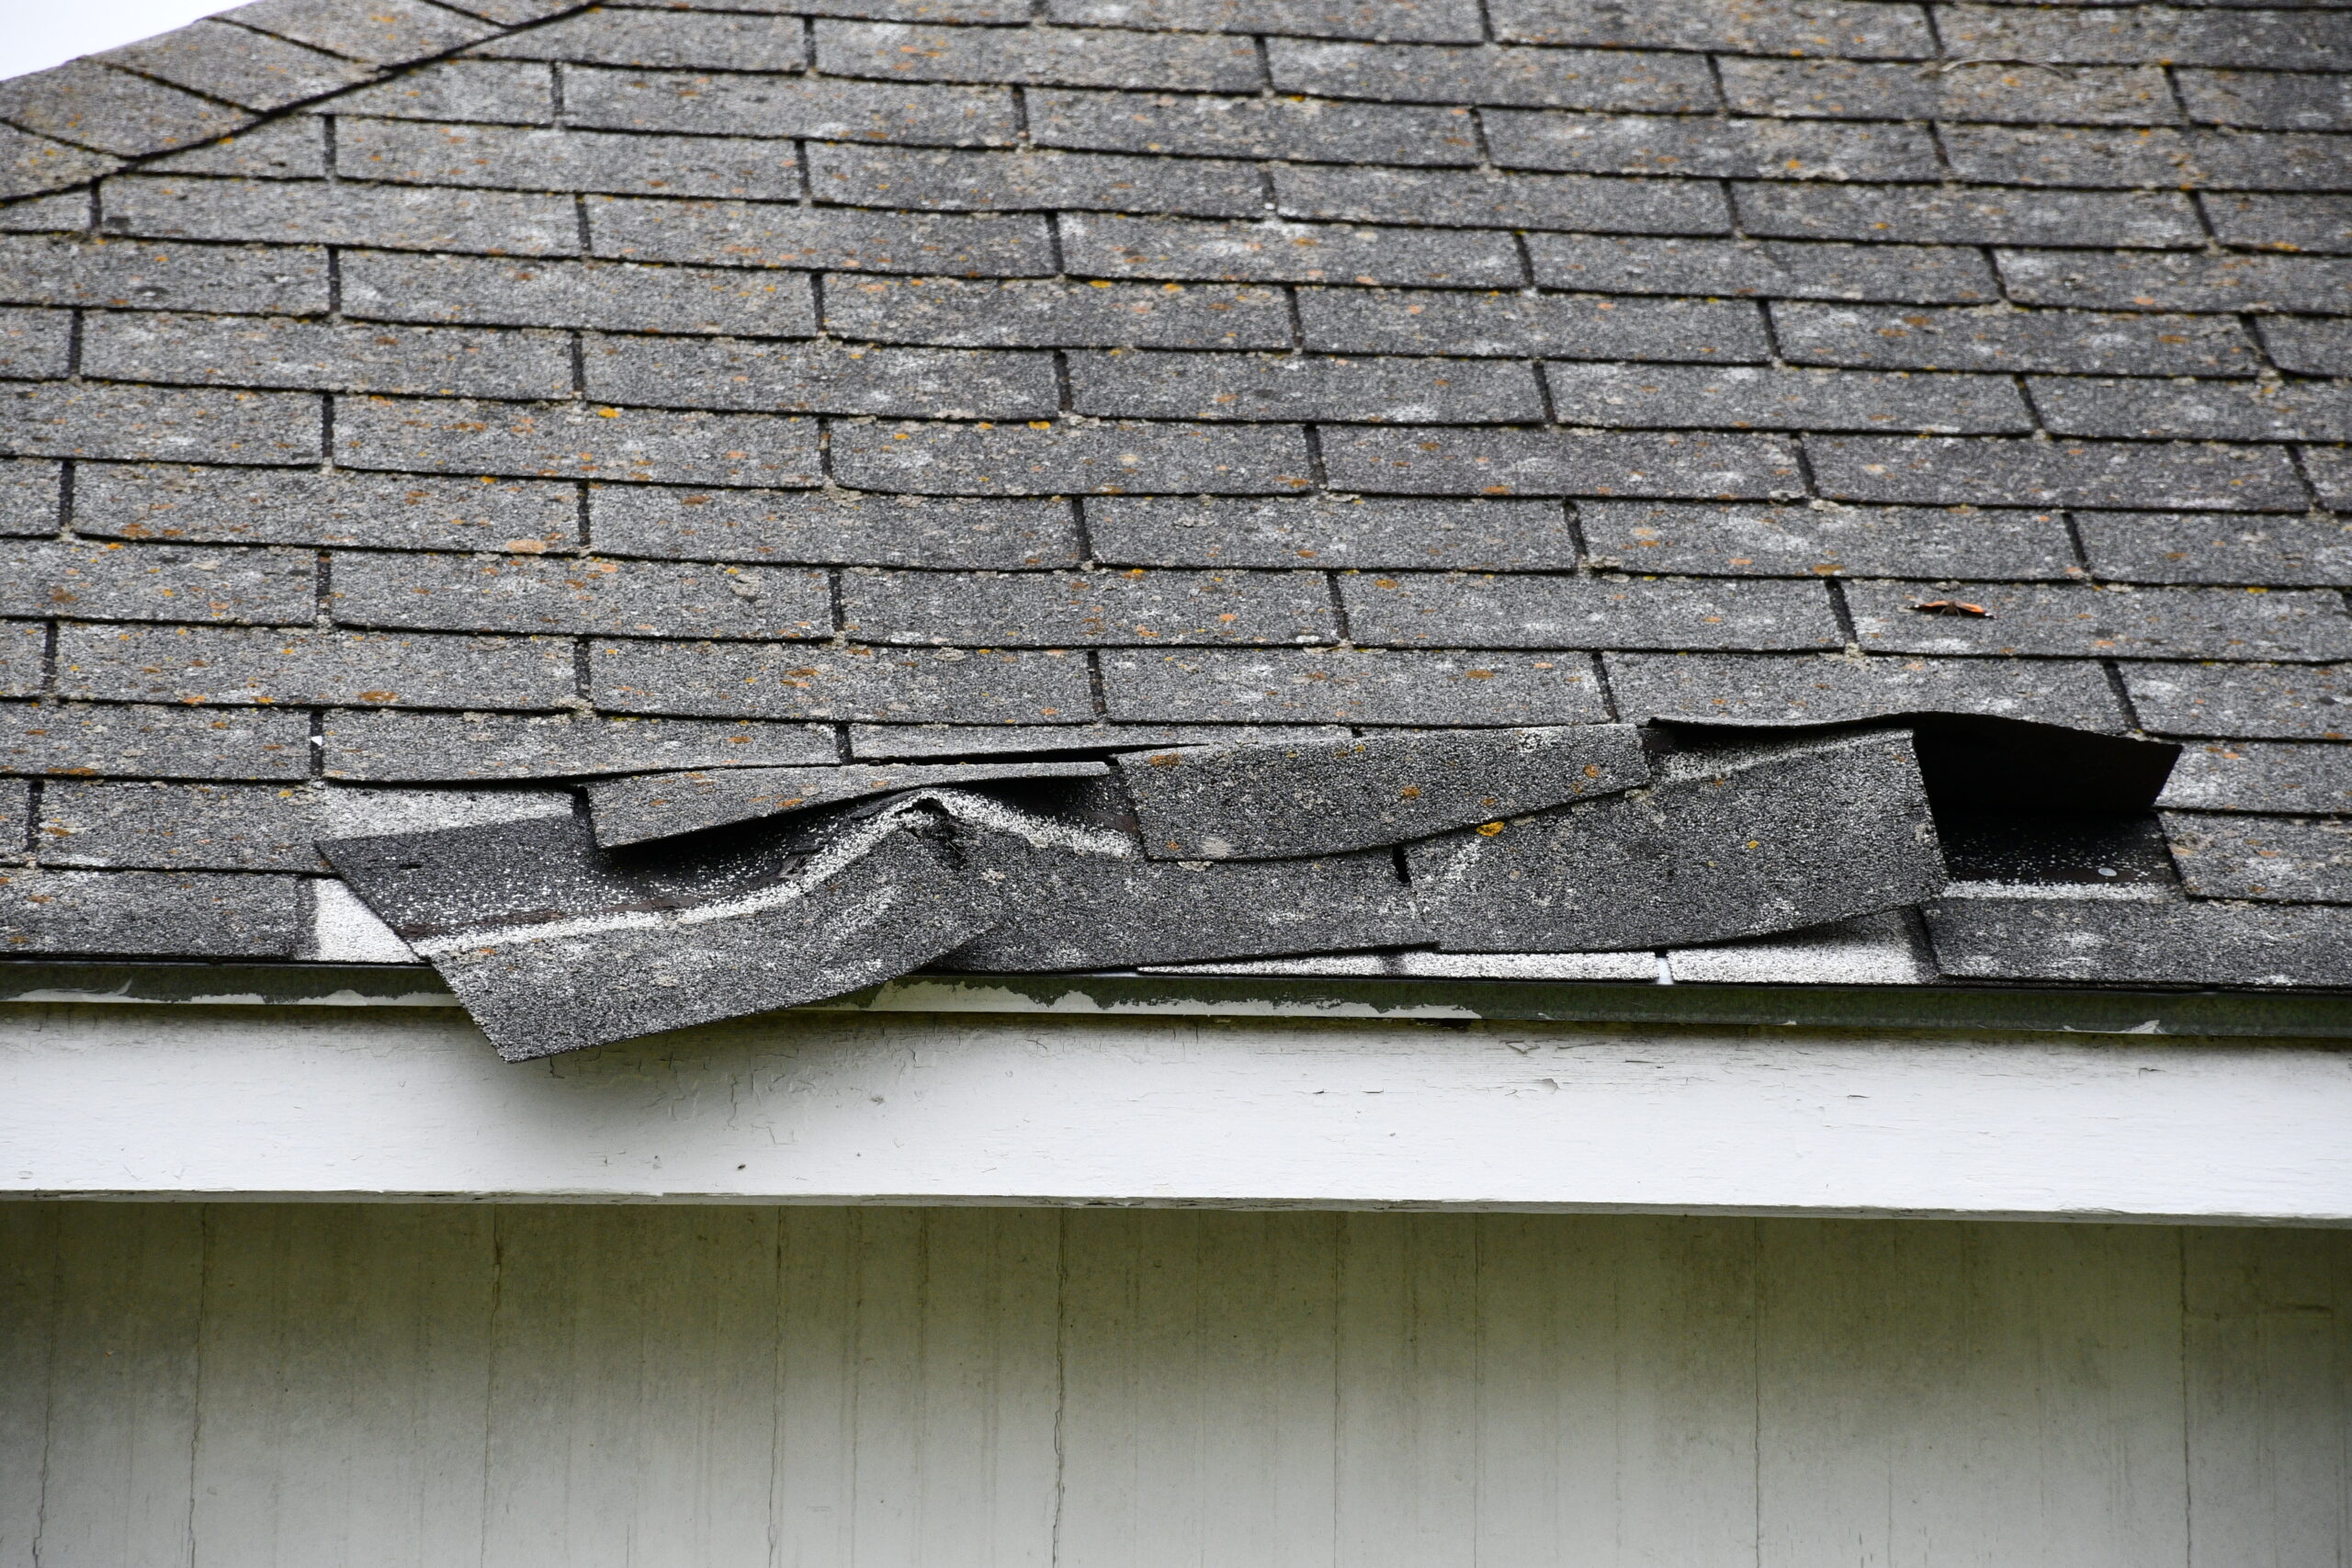 Roofing that is damaged and needs to be repaired.